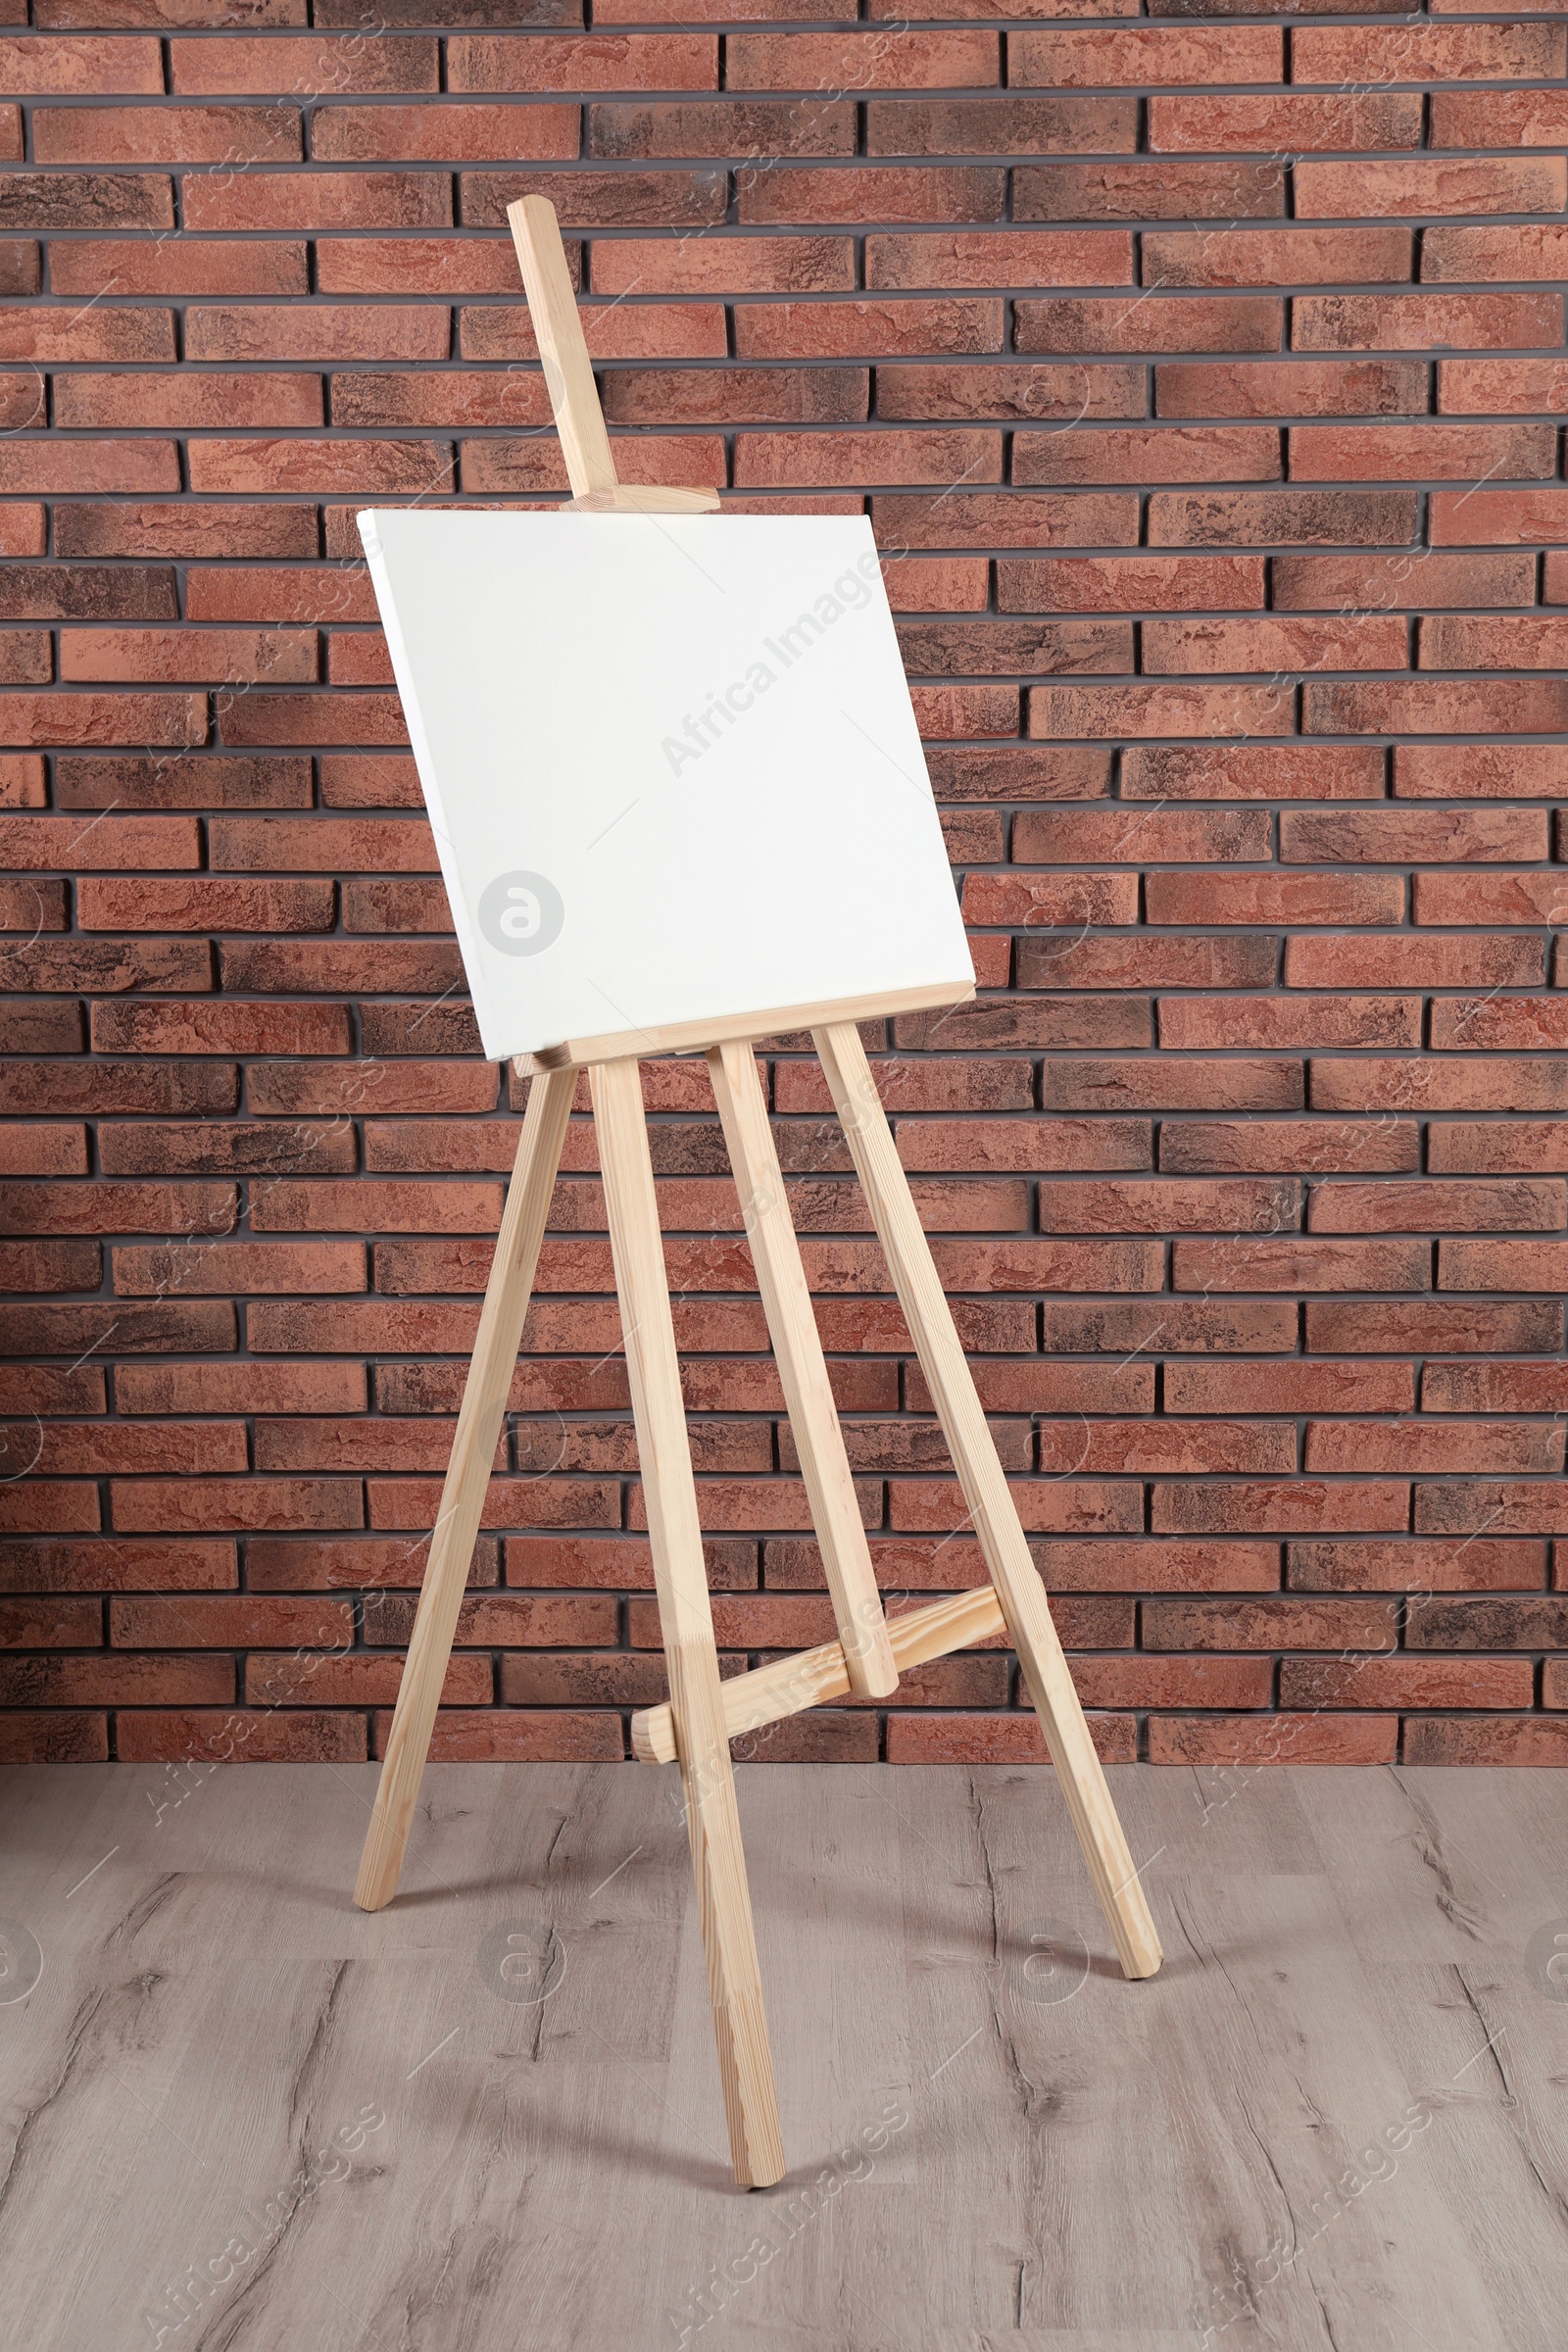 Photo of Wooden easel with blank canvas near brick wall